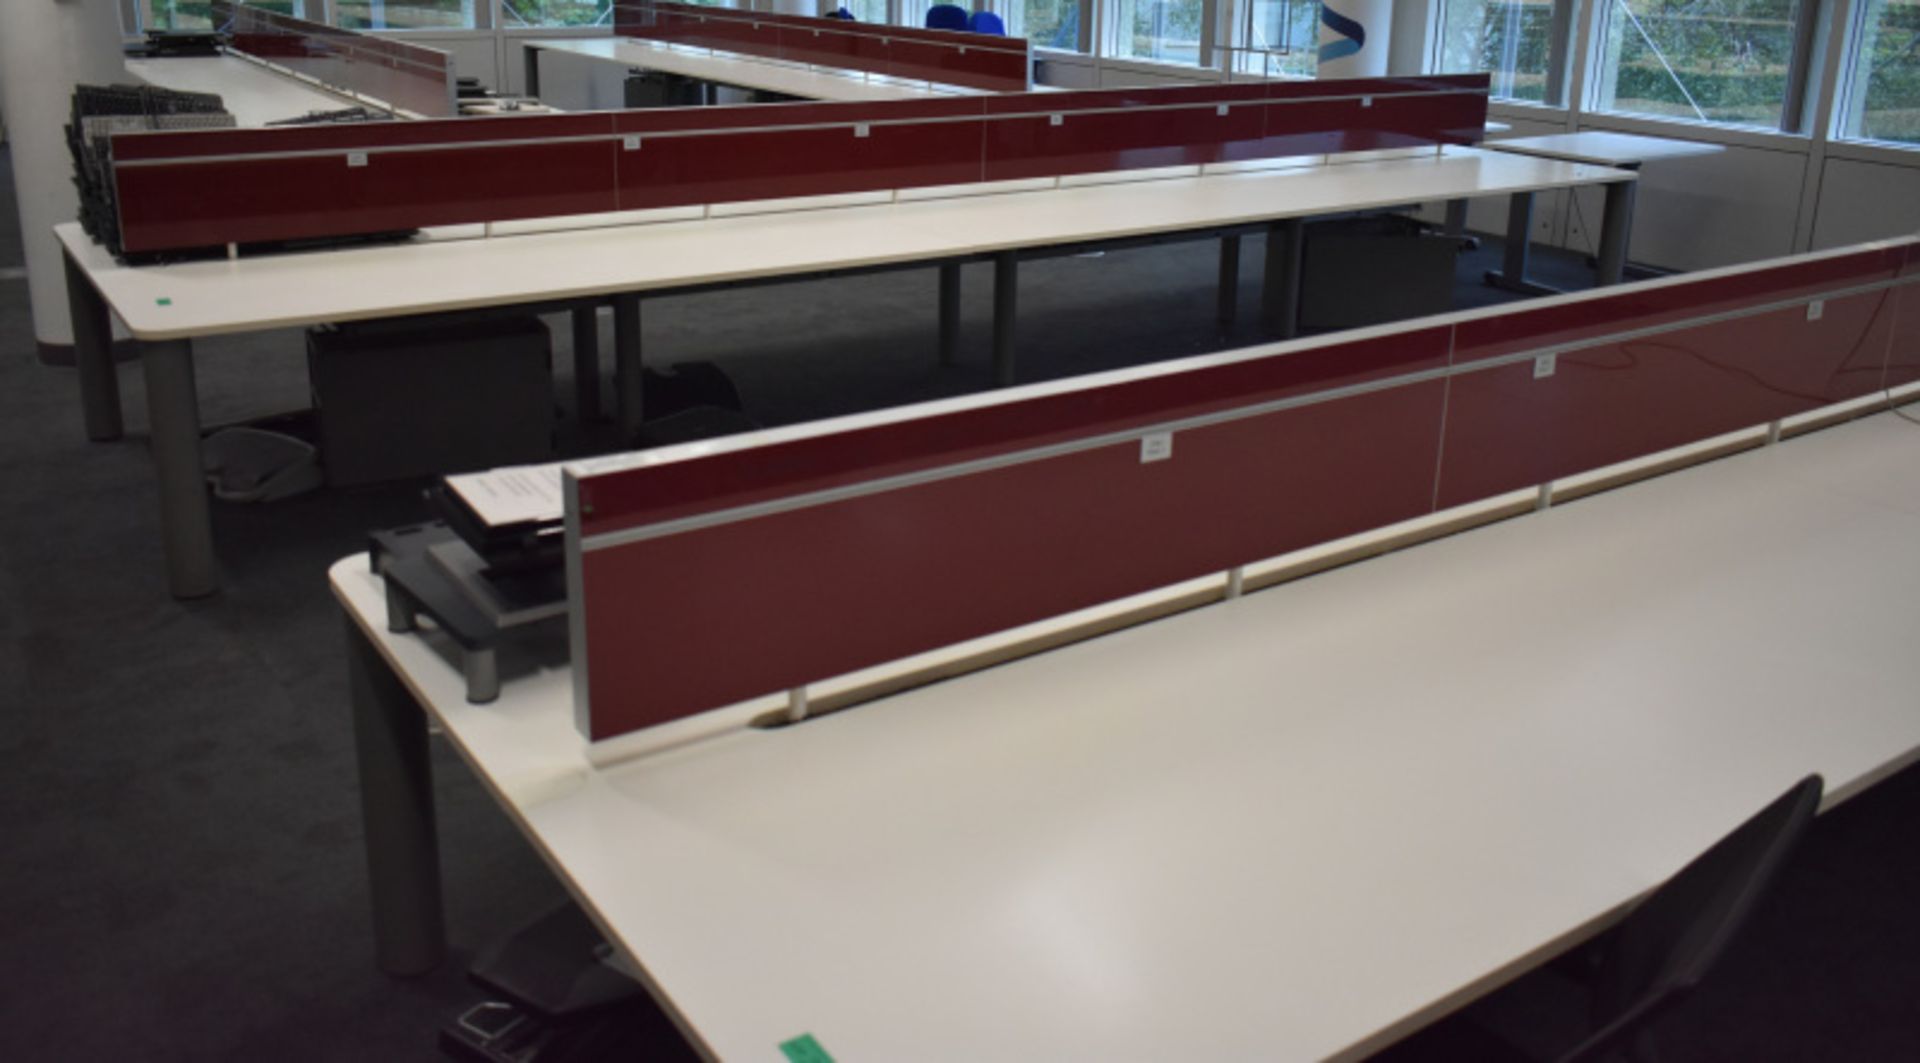 Bank of desks, seating 12, L 6500mm x W 1800mm x H 1180mm, buyer to dismantle and remove - Image 3 of 4